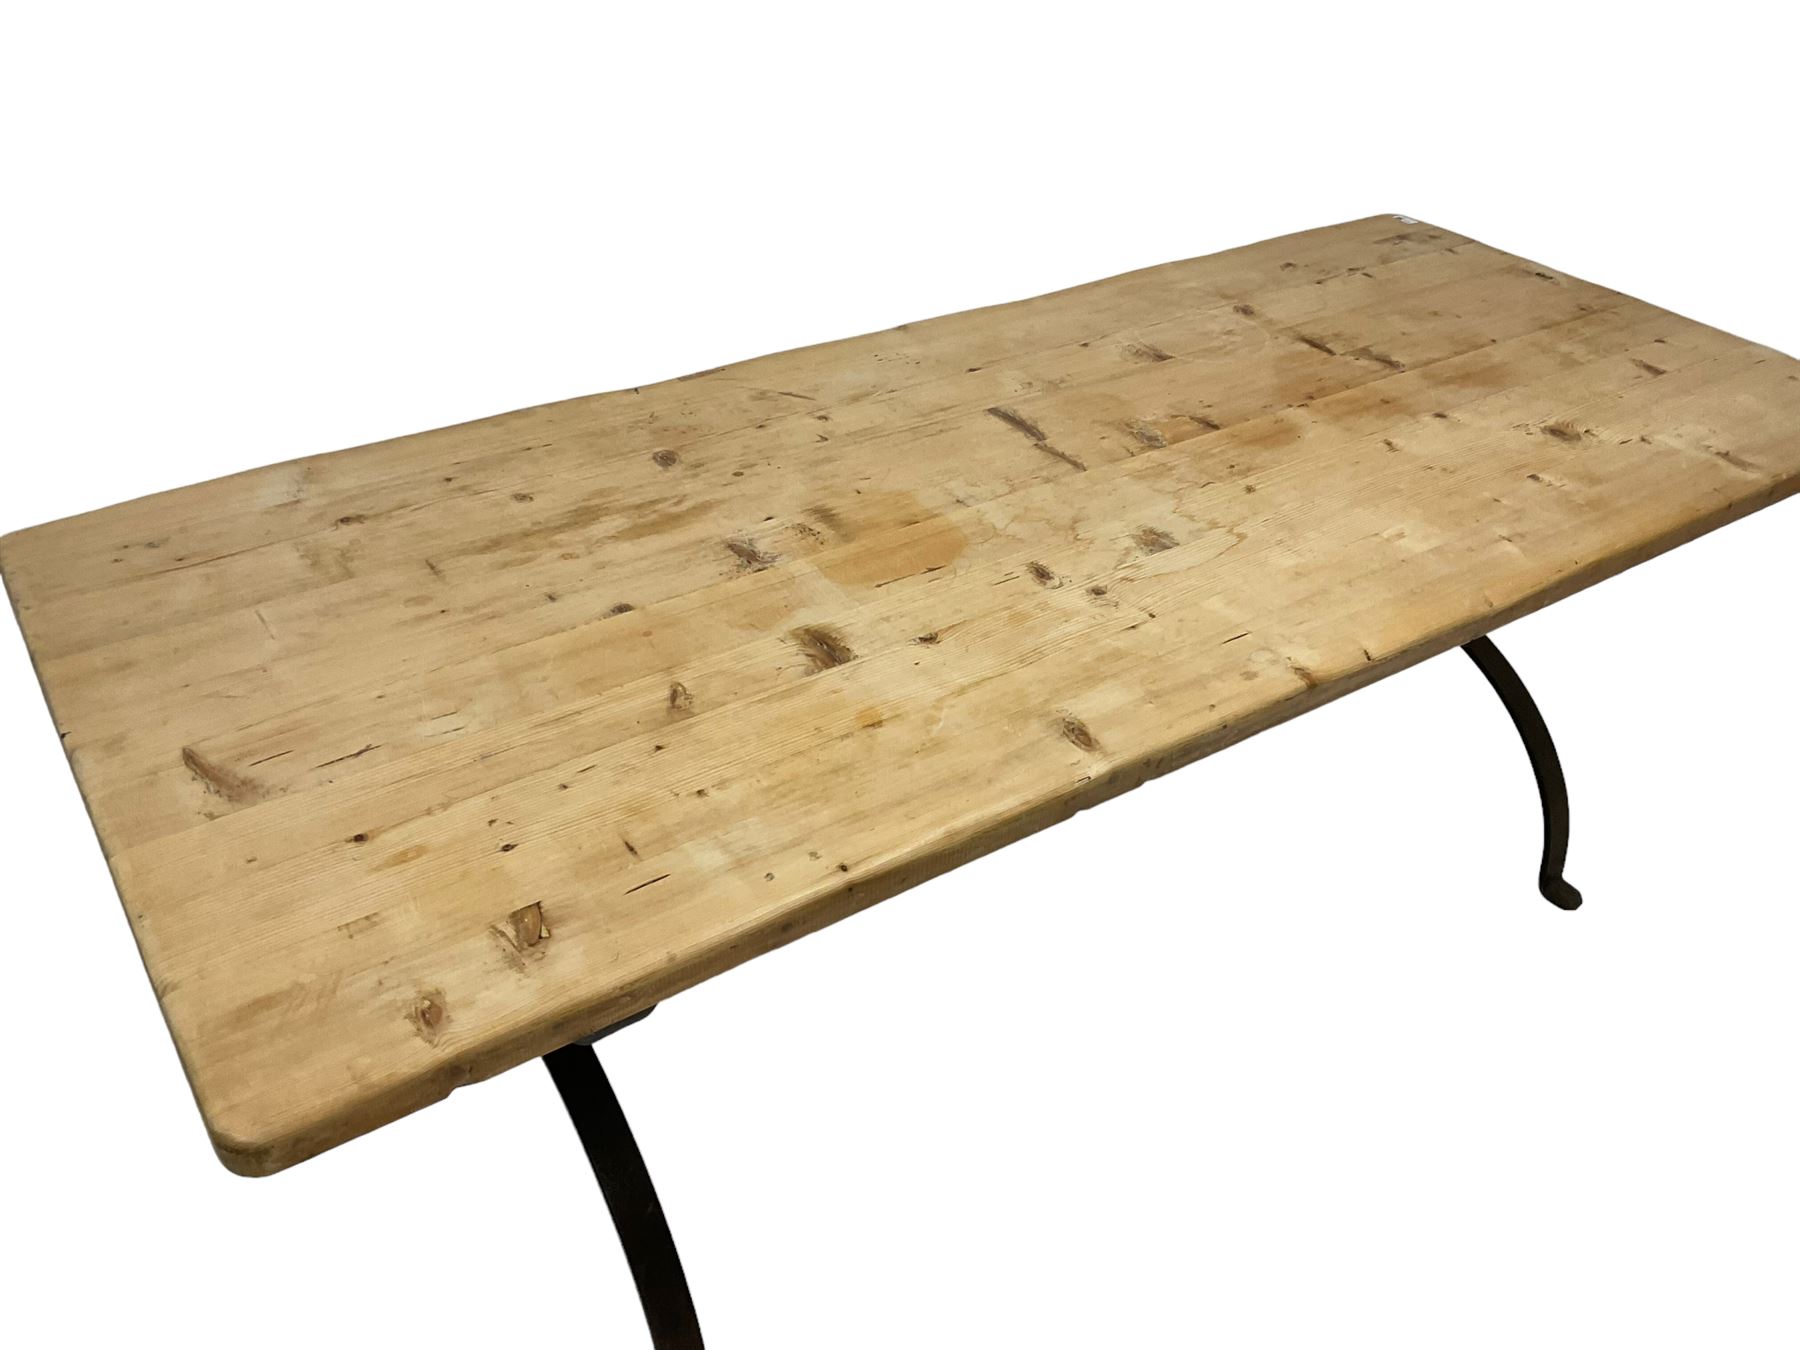 Stripped pine dining table - Image 2 of 6